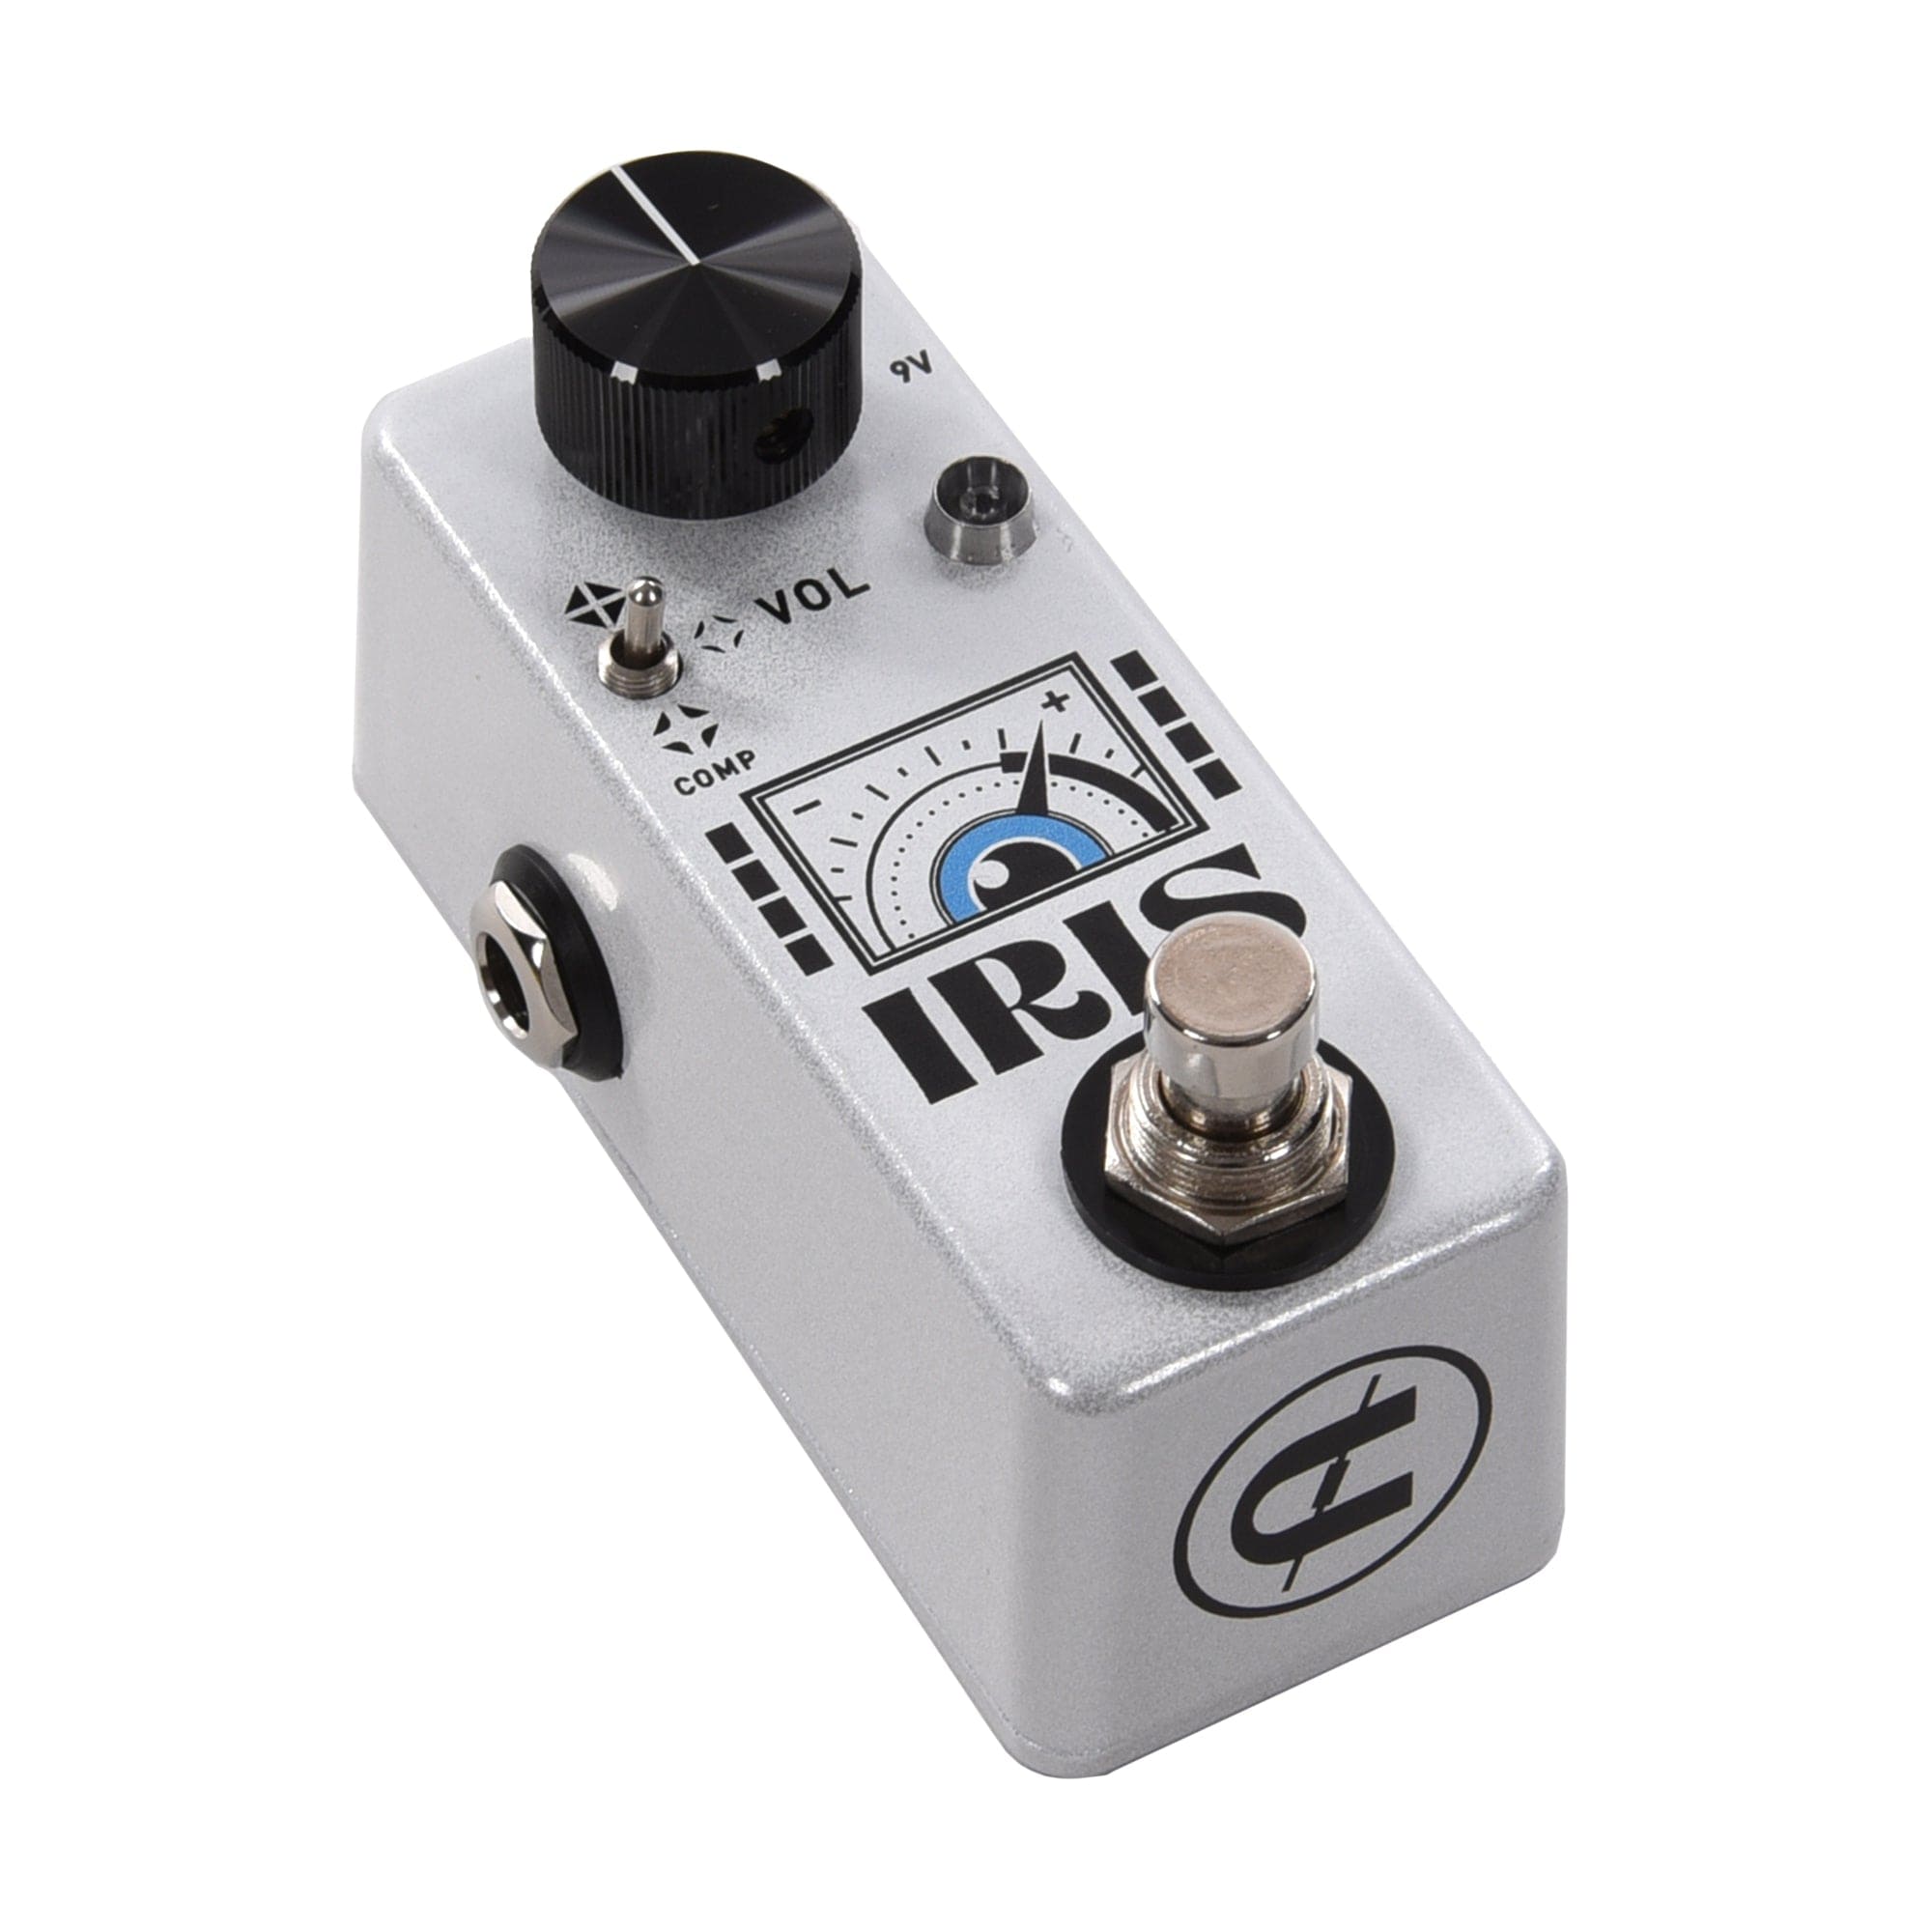 CopperSound Pedals Iris Optical Compressor Pedal Effects and Pedals / Compression and Sustain